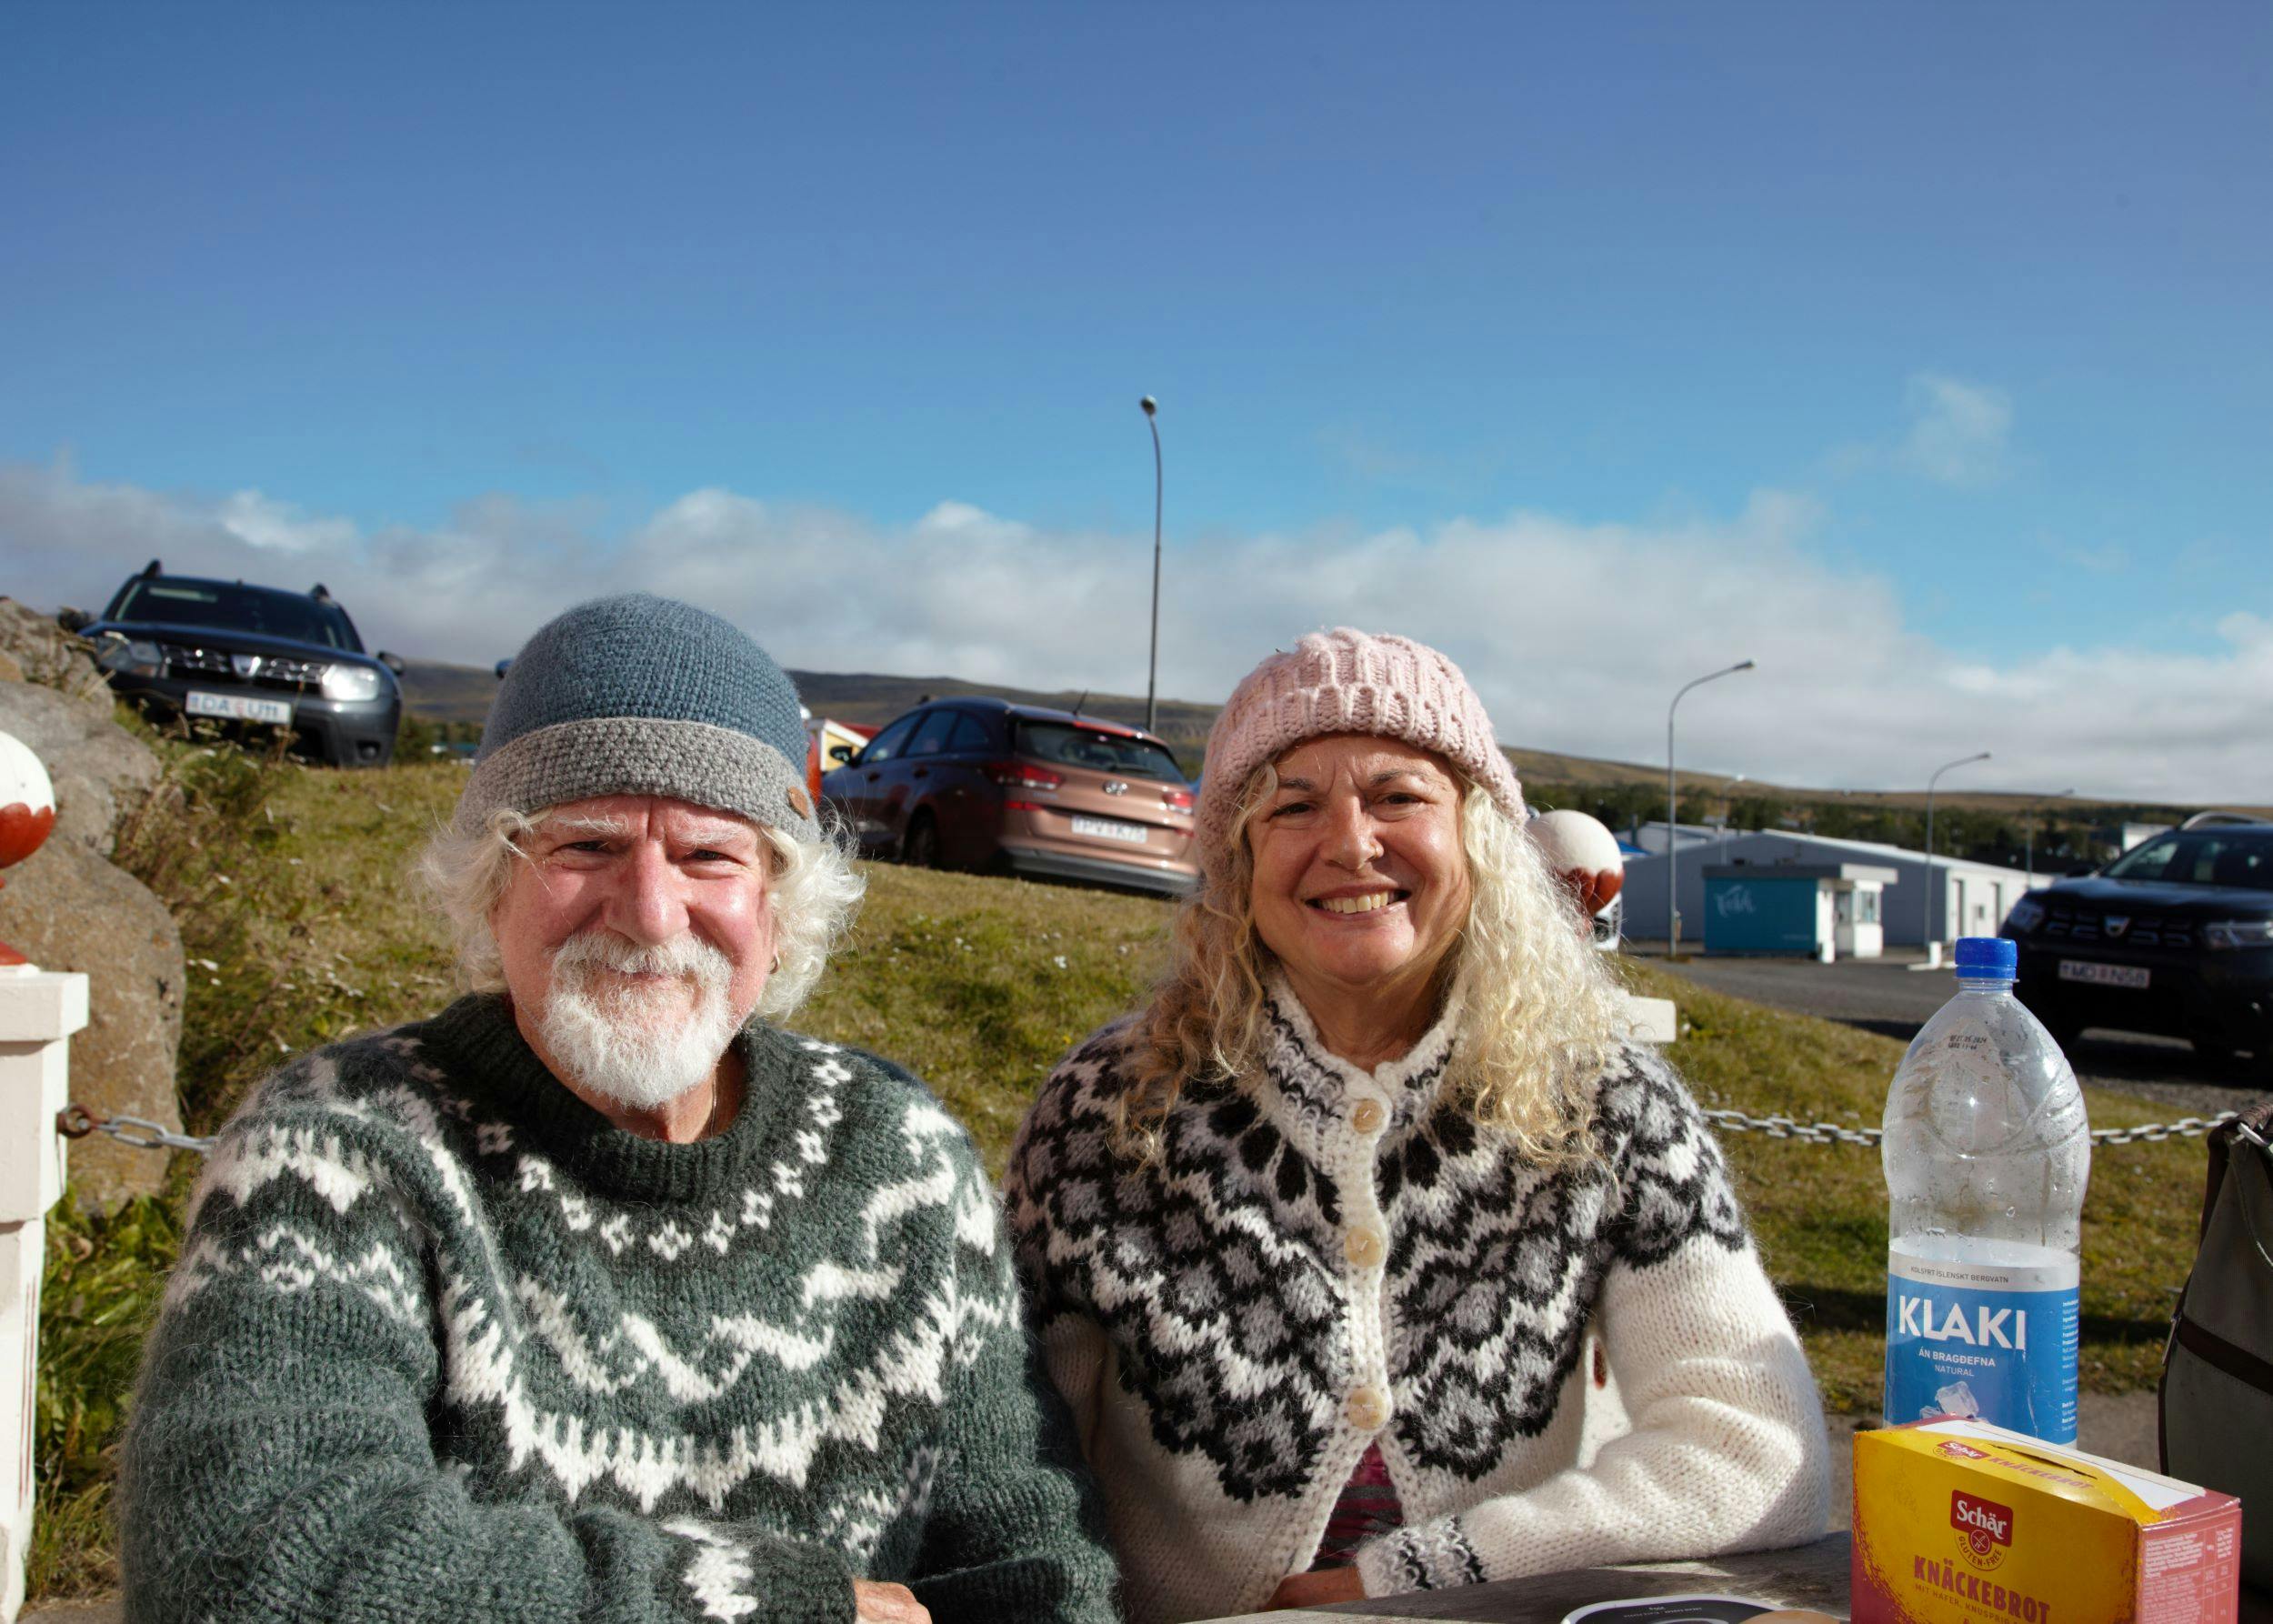 Elderly couple in handknitted Icelandic sweaters sitting on a picnic table, smiling, the sun i shining, cars in the background